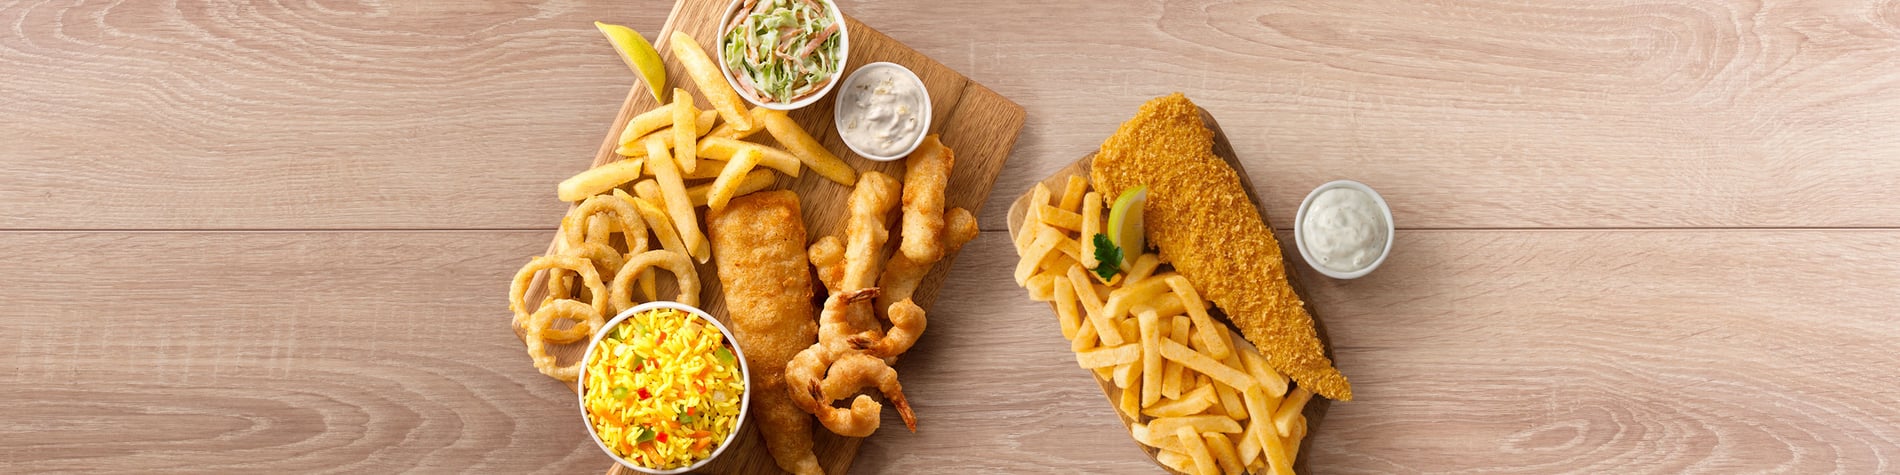 Seafood meals from Fishaways Polofields Retail Centre including a Crunchy Fish and Chips meal and a seafood Platter for One with hake, calamari, prawns, chips, onion rings, and coleslaw.